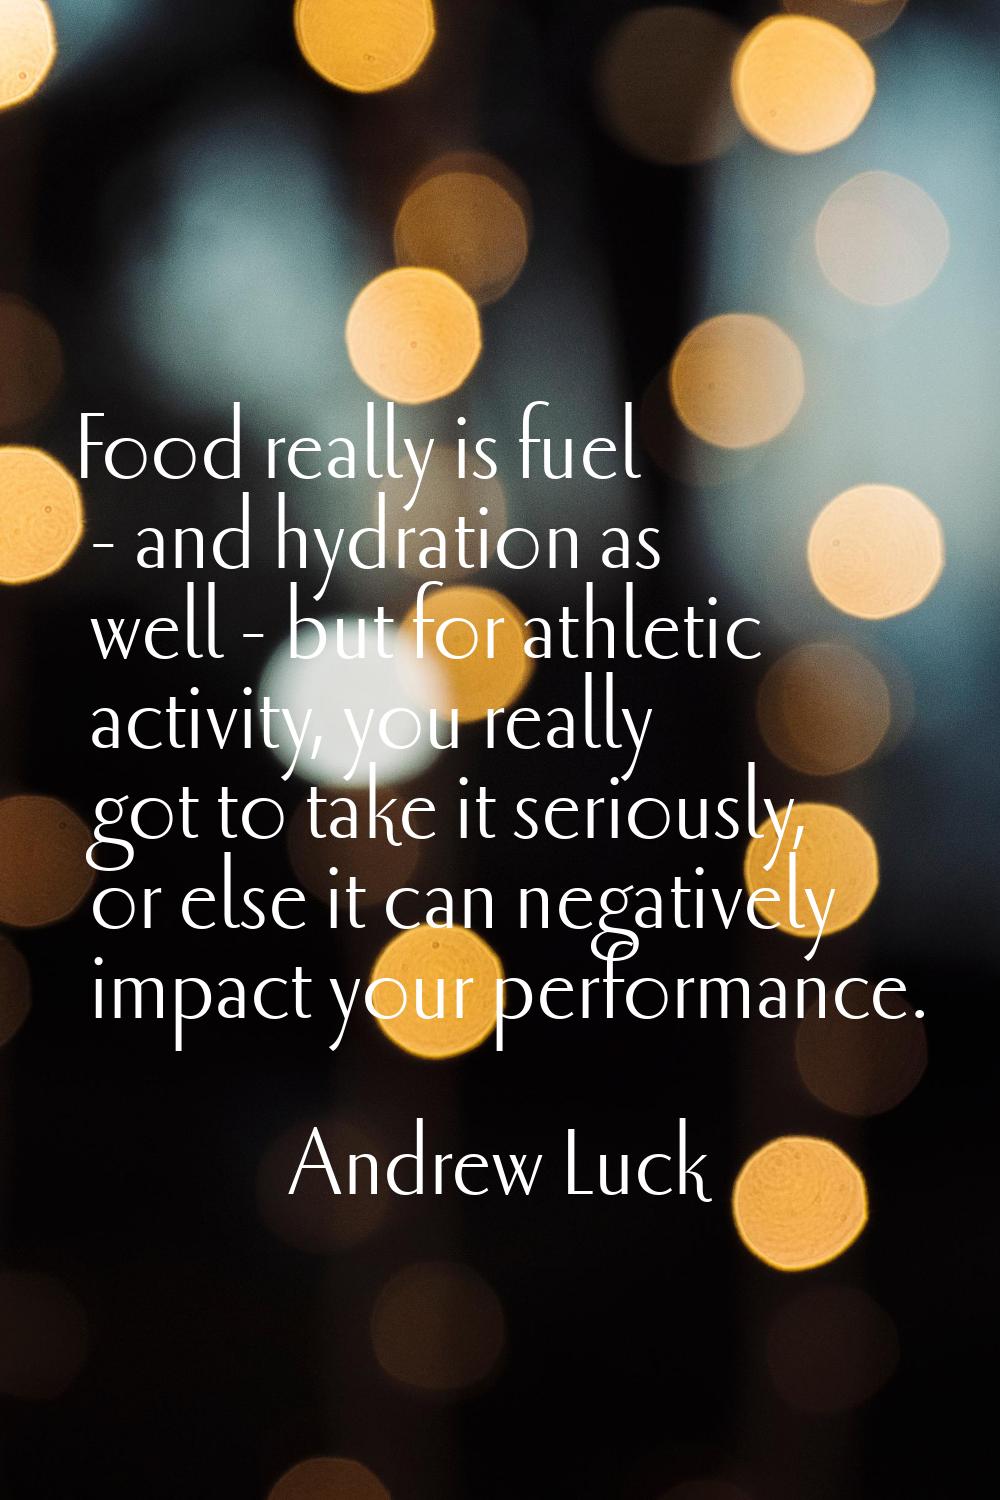 Food really is fuel - and hydration as well - but for athletic activity, you really got to take it 